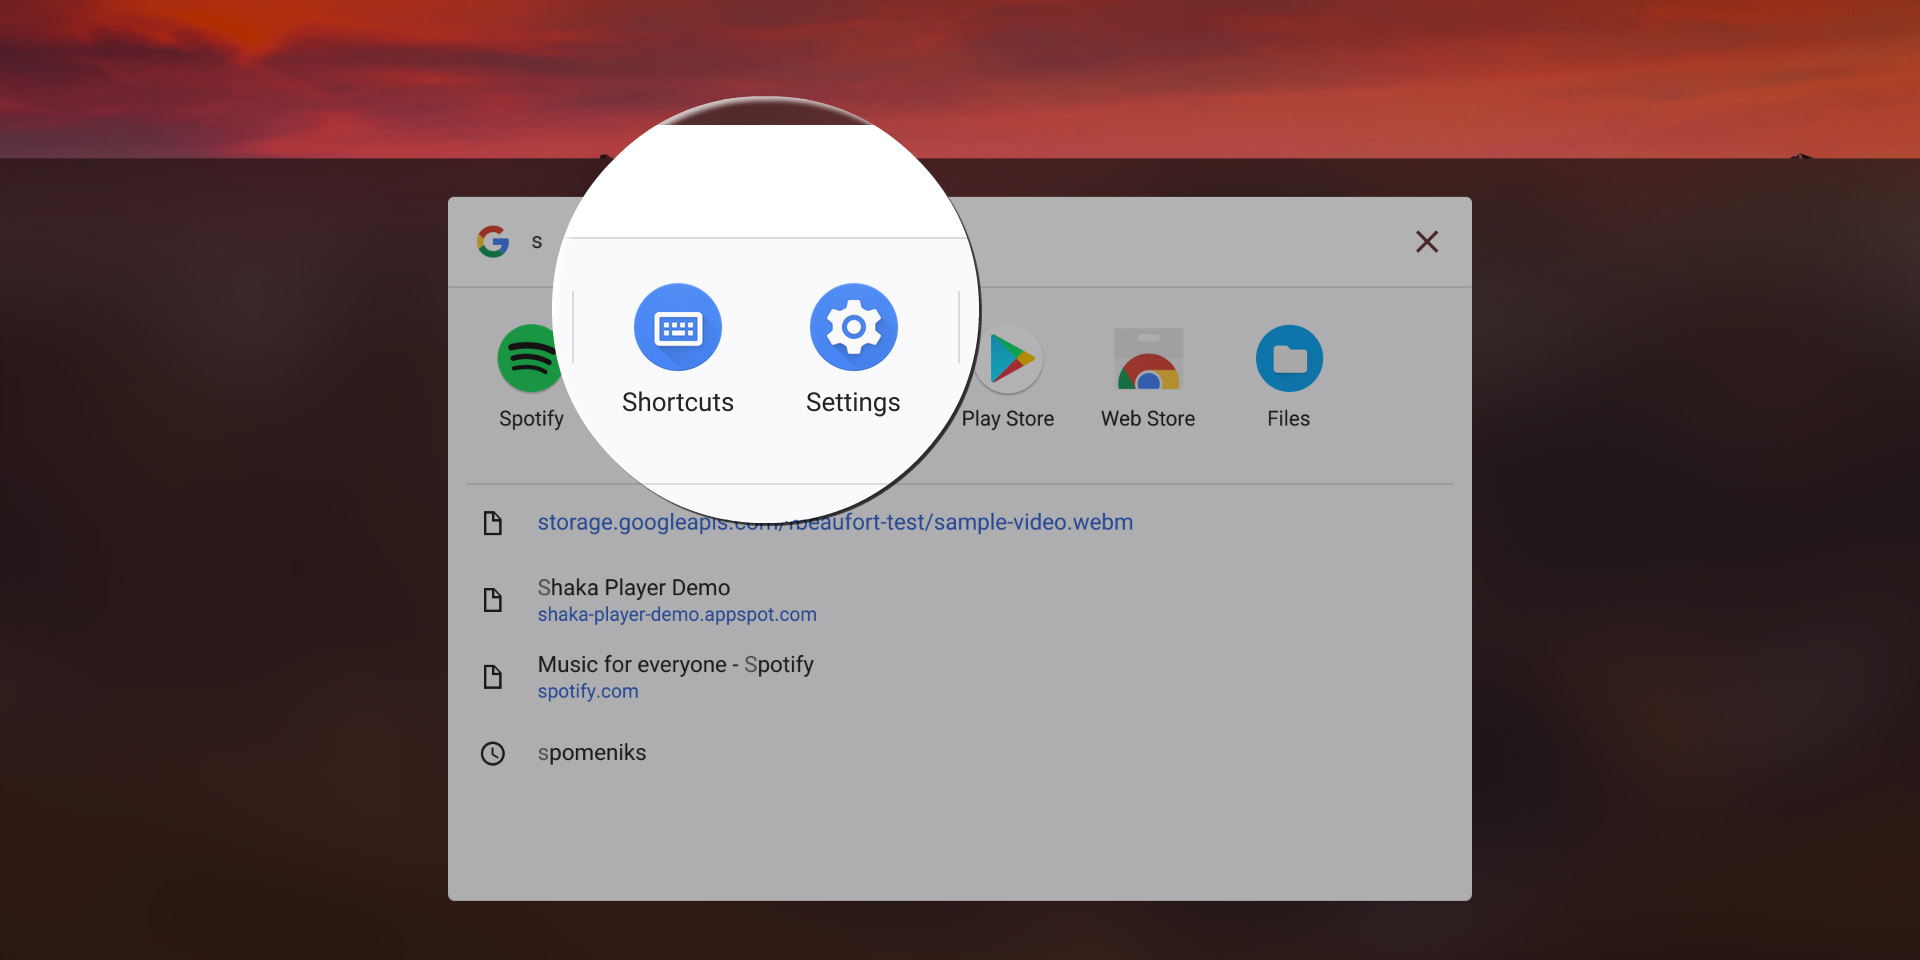 Chrome OS adds access to settings menu and shortcuts through search launcher - 9to5Google